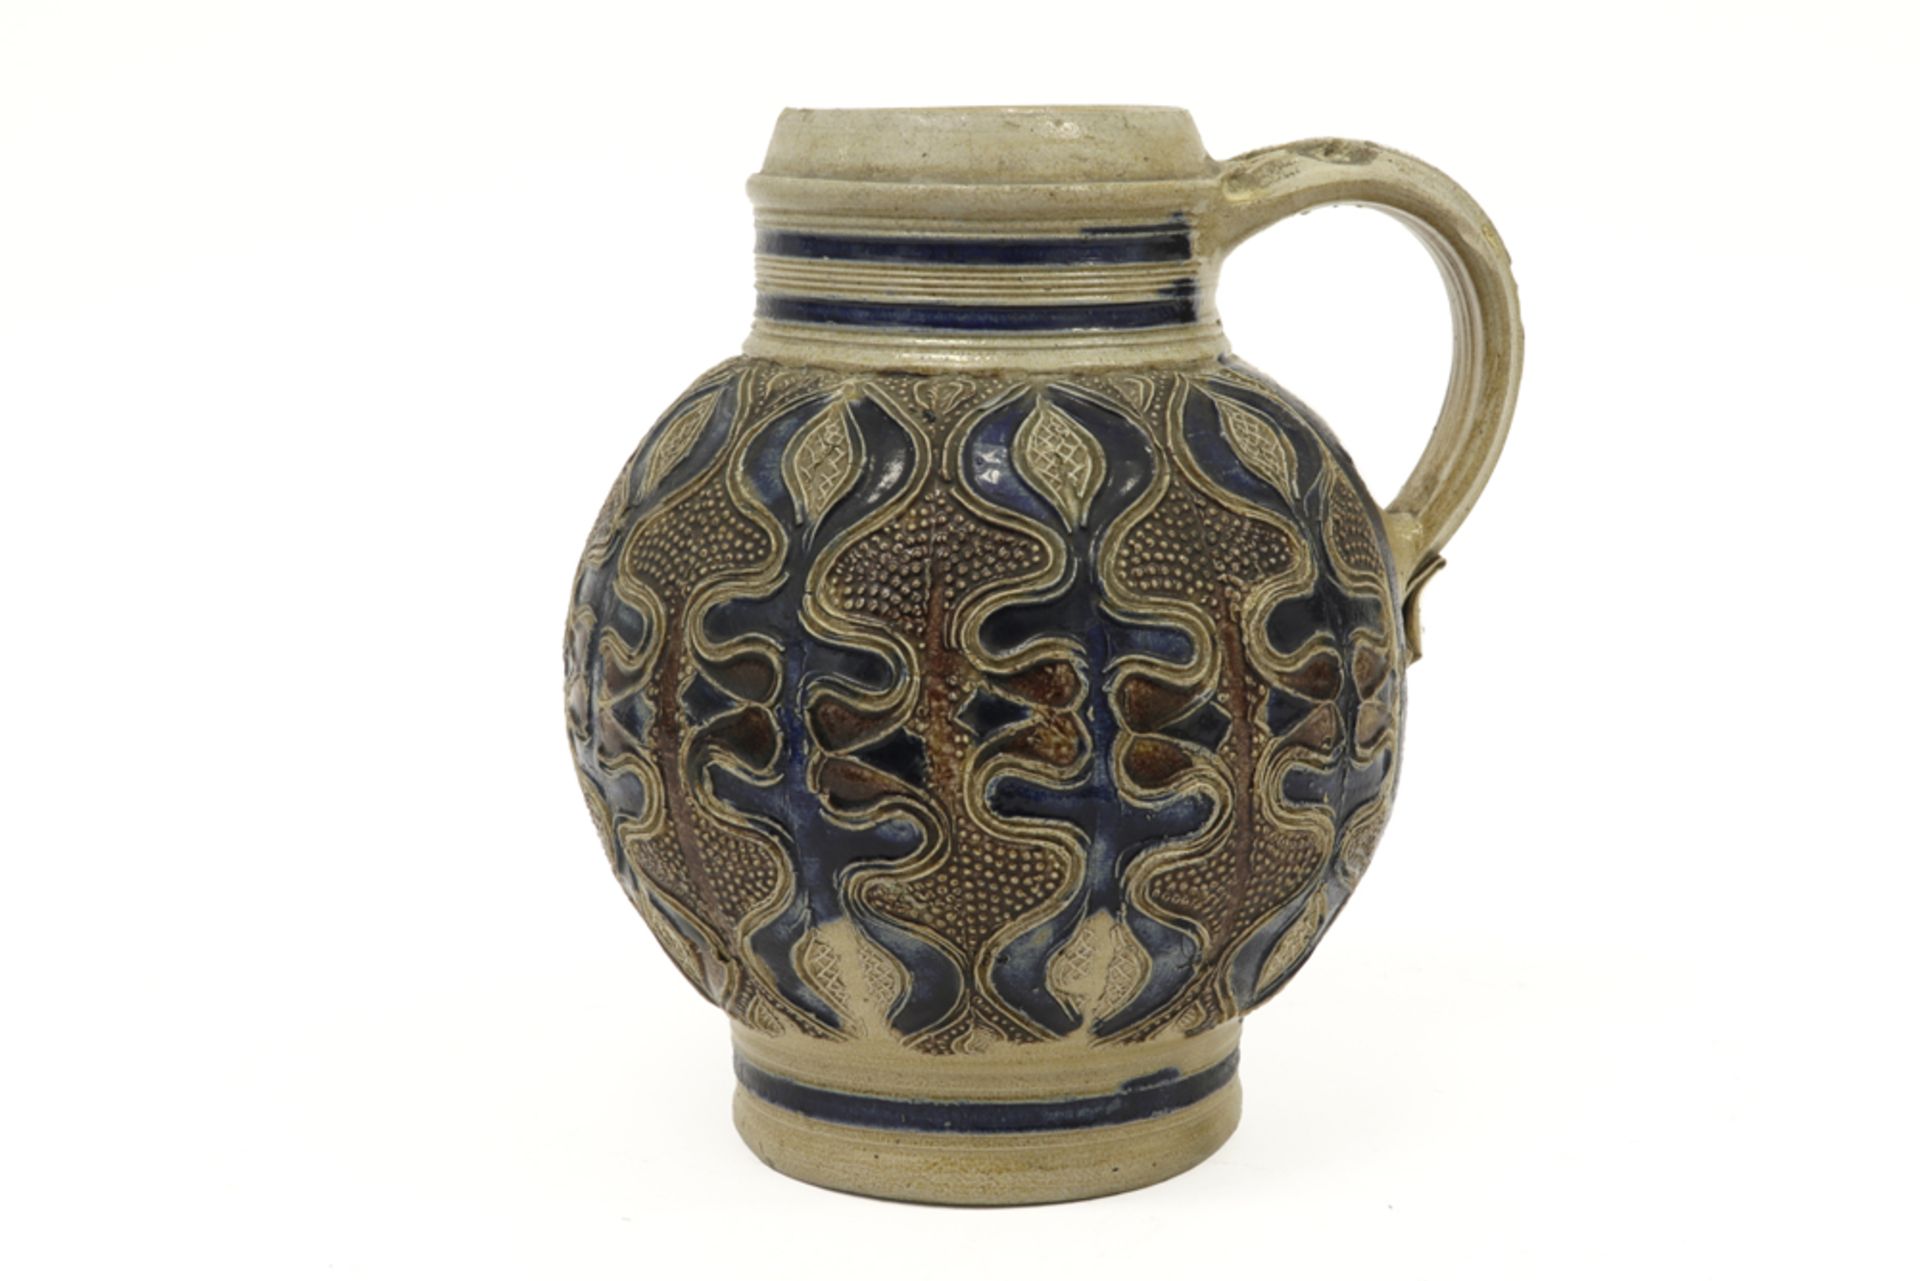 17th Cent. Westerwald pitcher in earthenware - Image 2 of 6